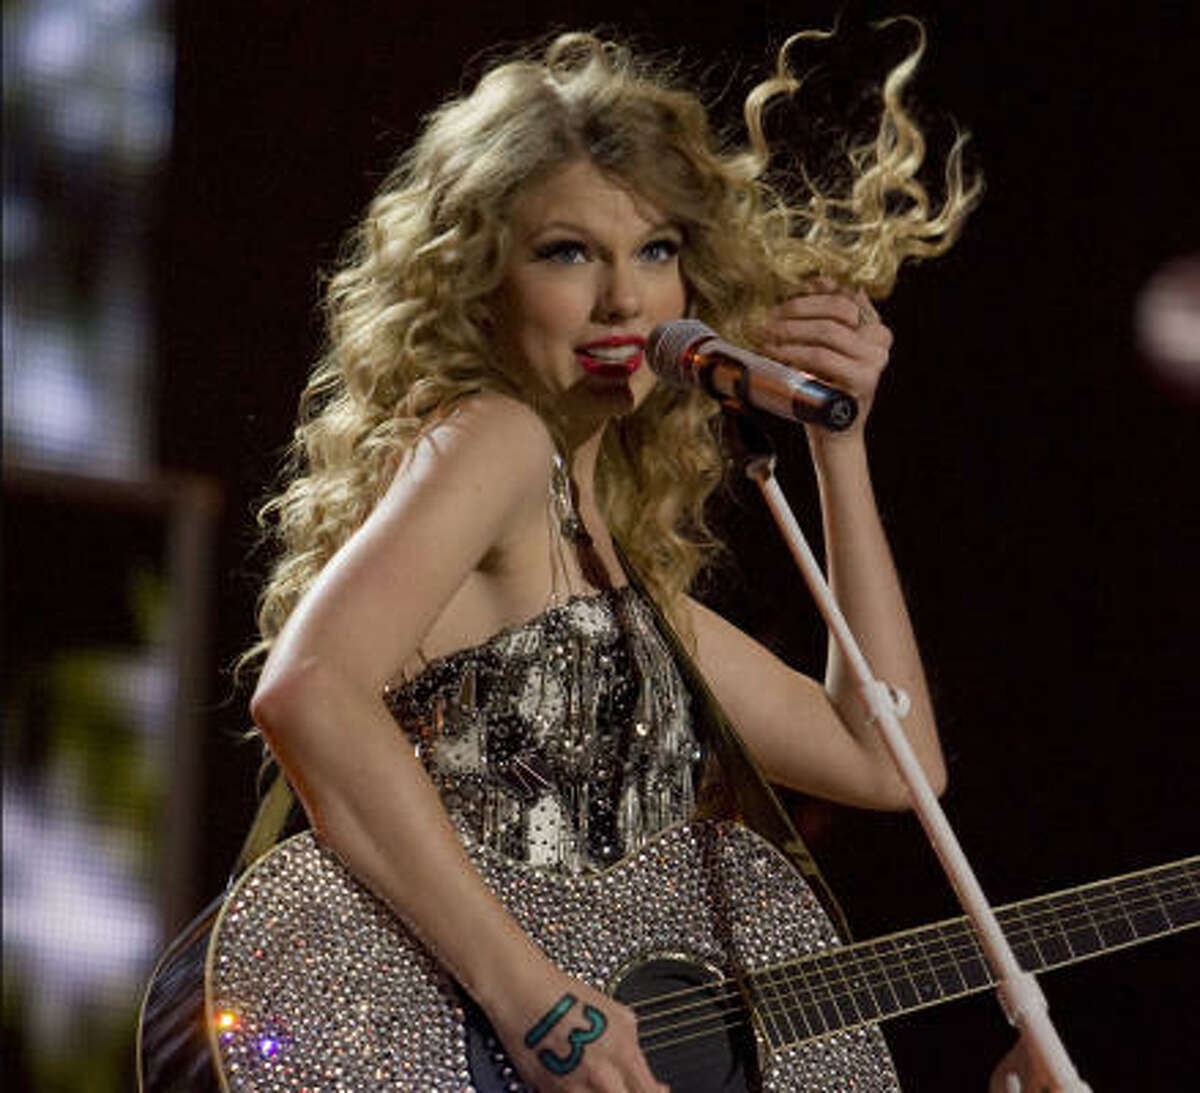 taylor swift fearless tour